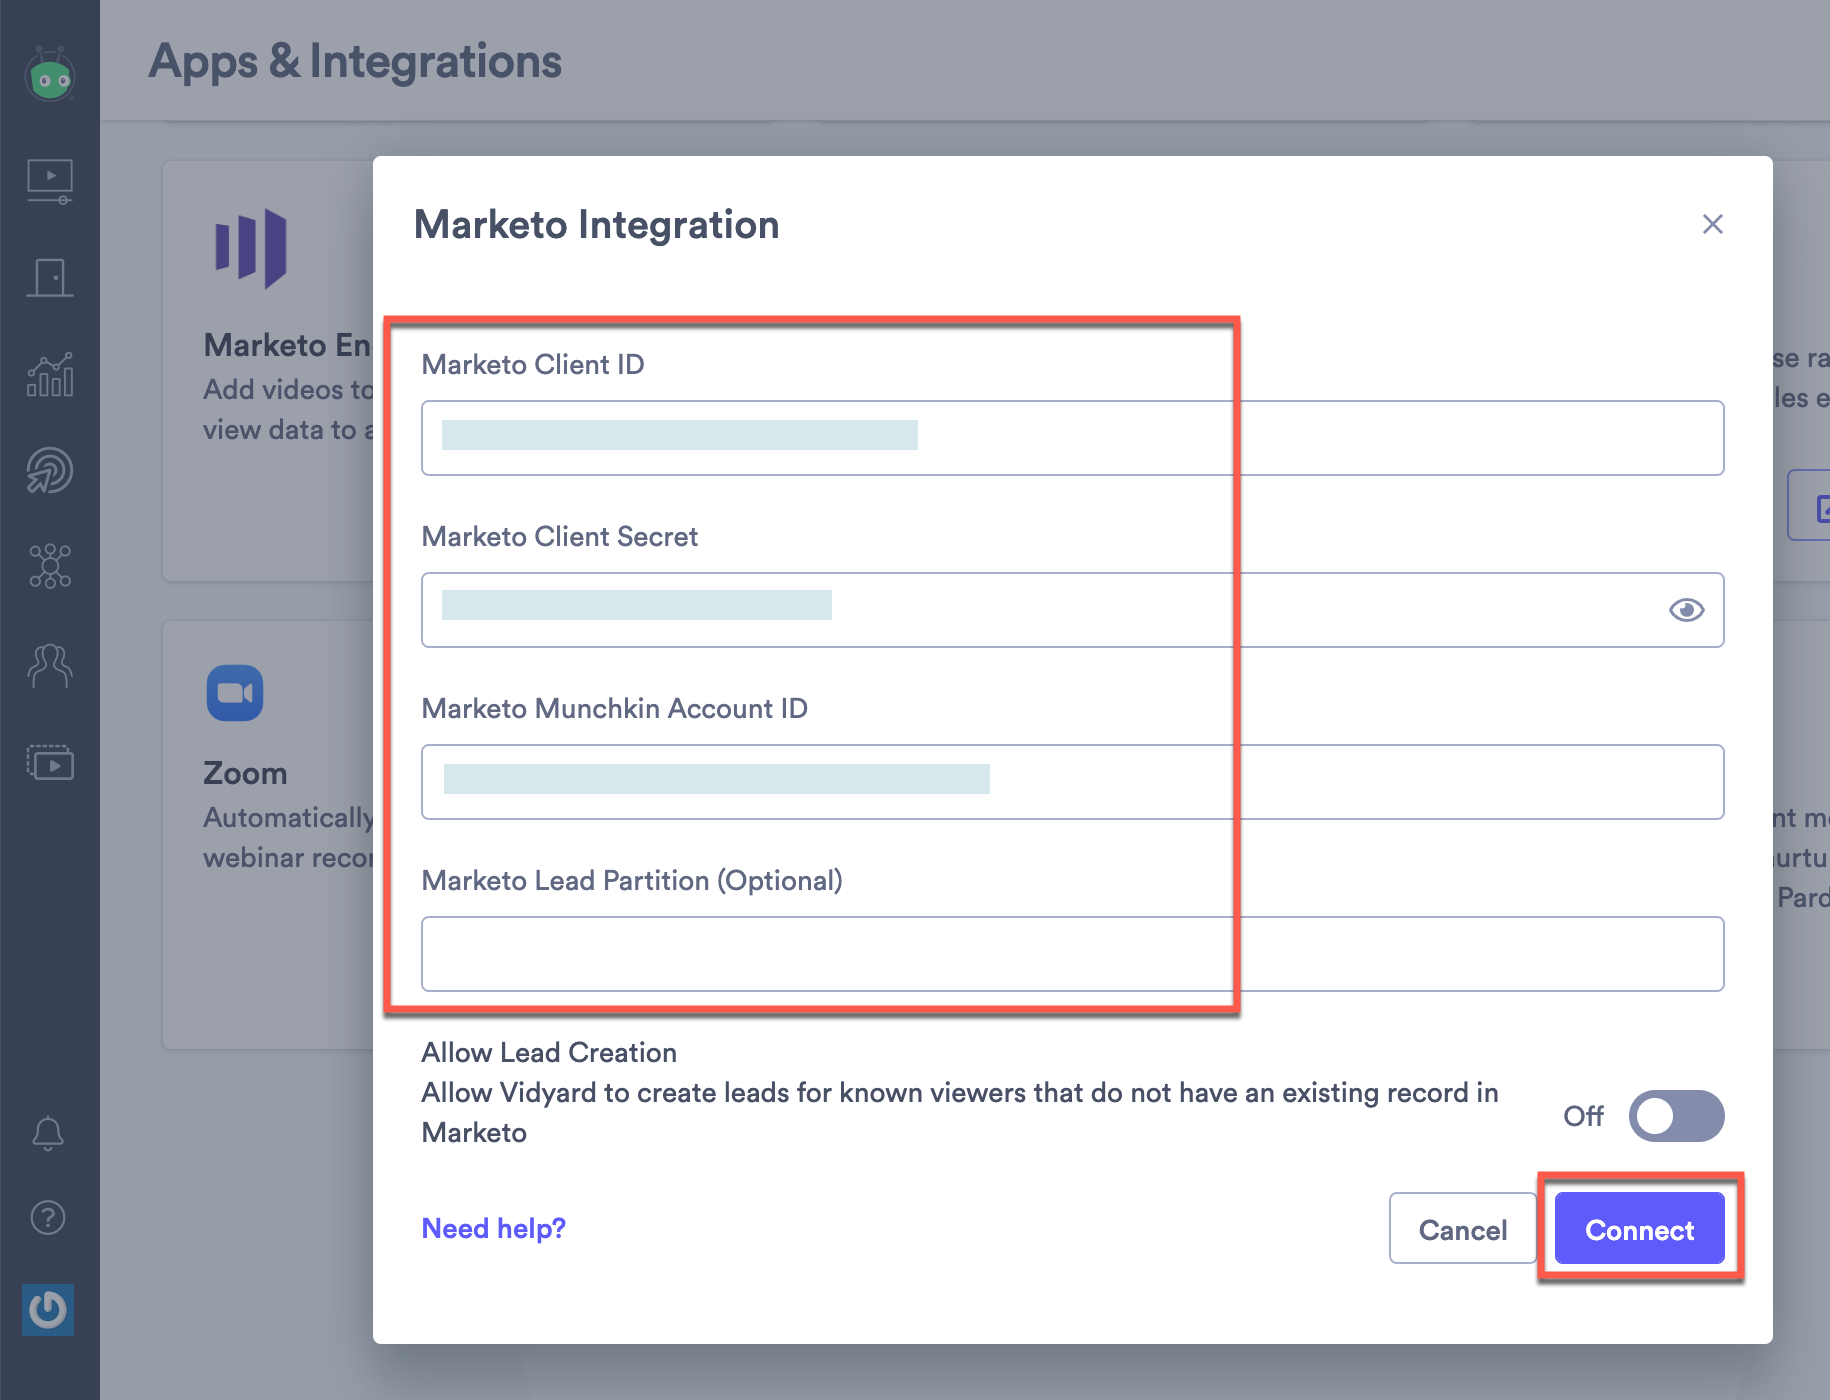 To establish the OAuth connection between Marketo and Vidyard, entering your client ID, secret and Munchkin account ID